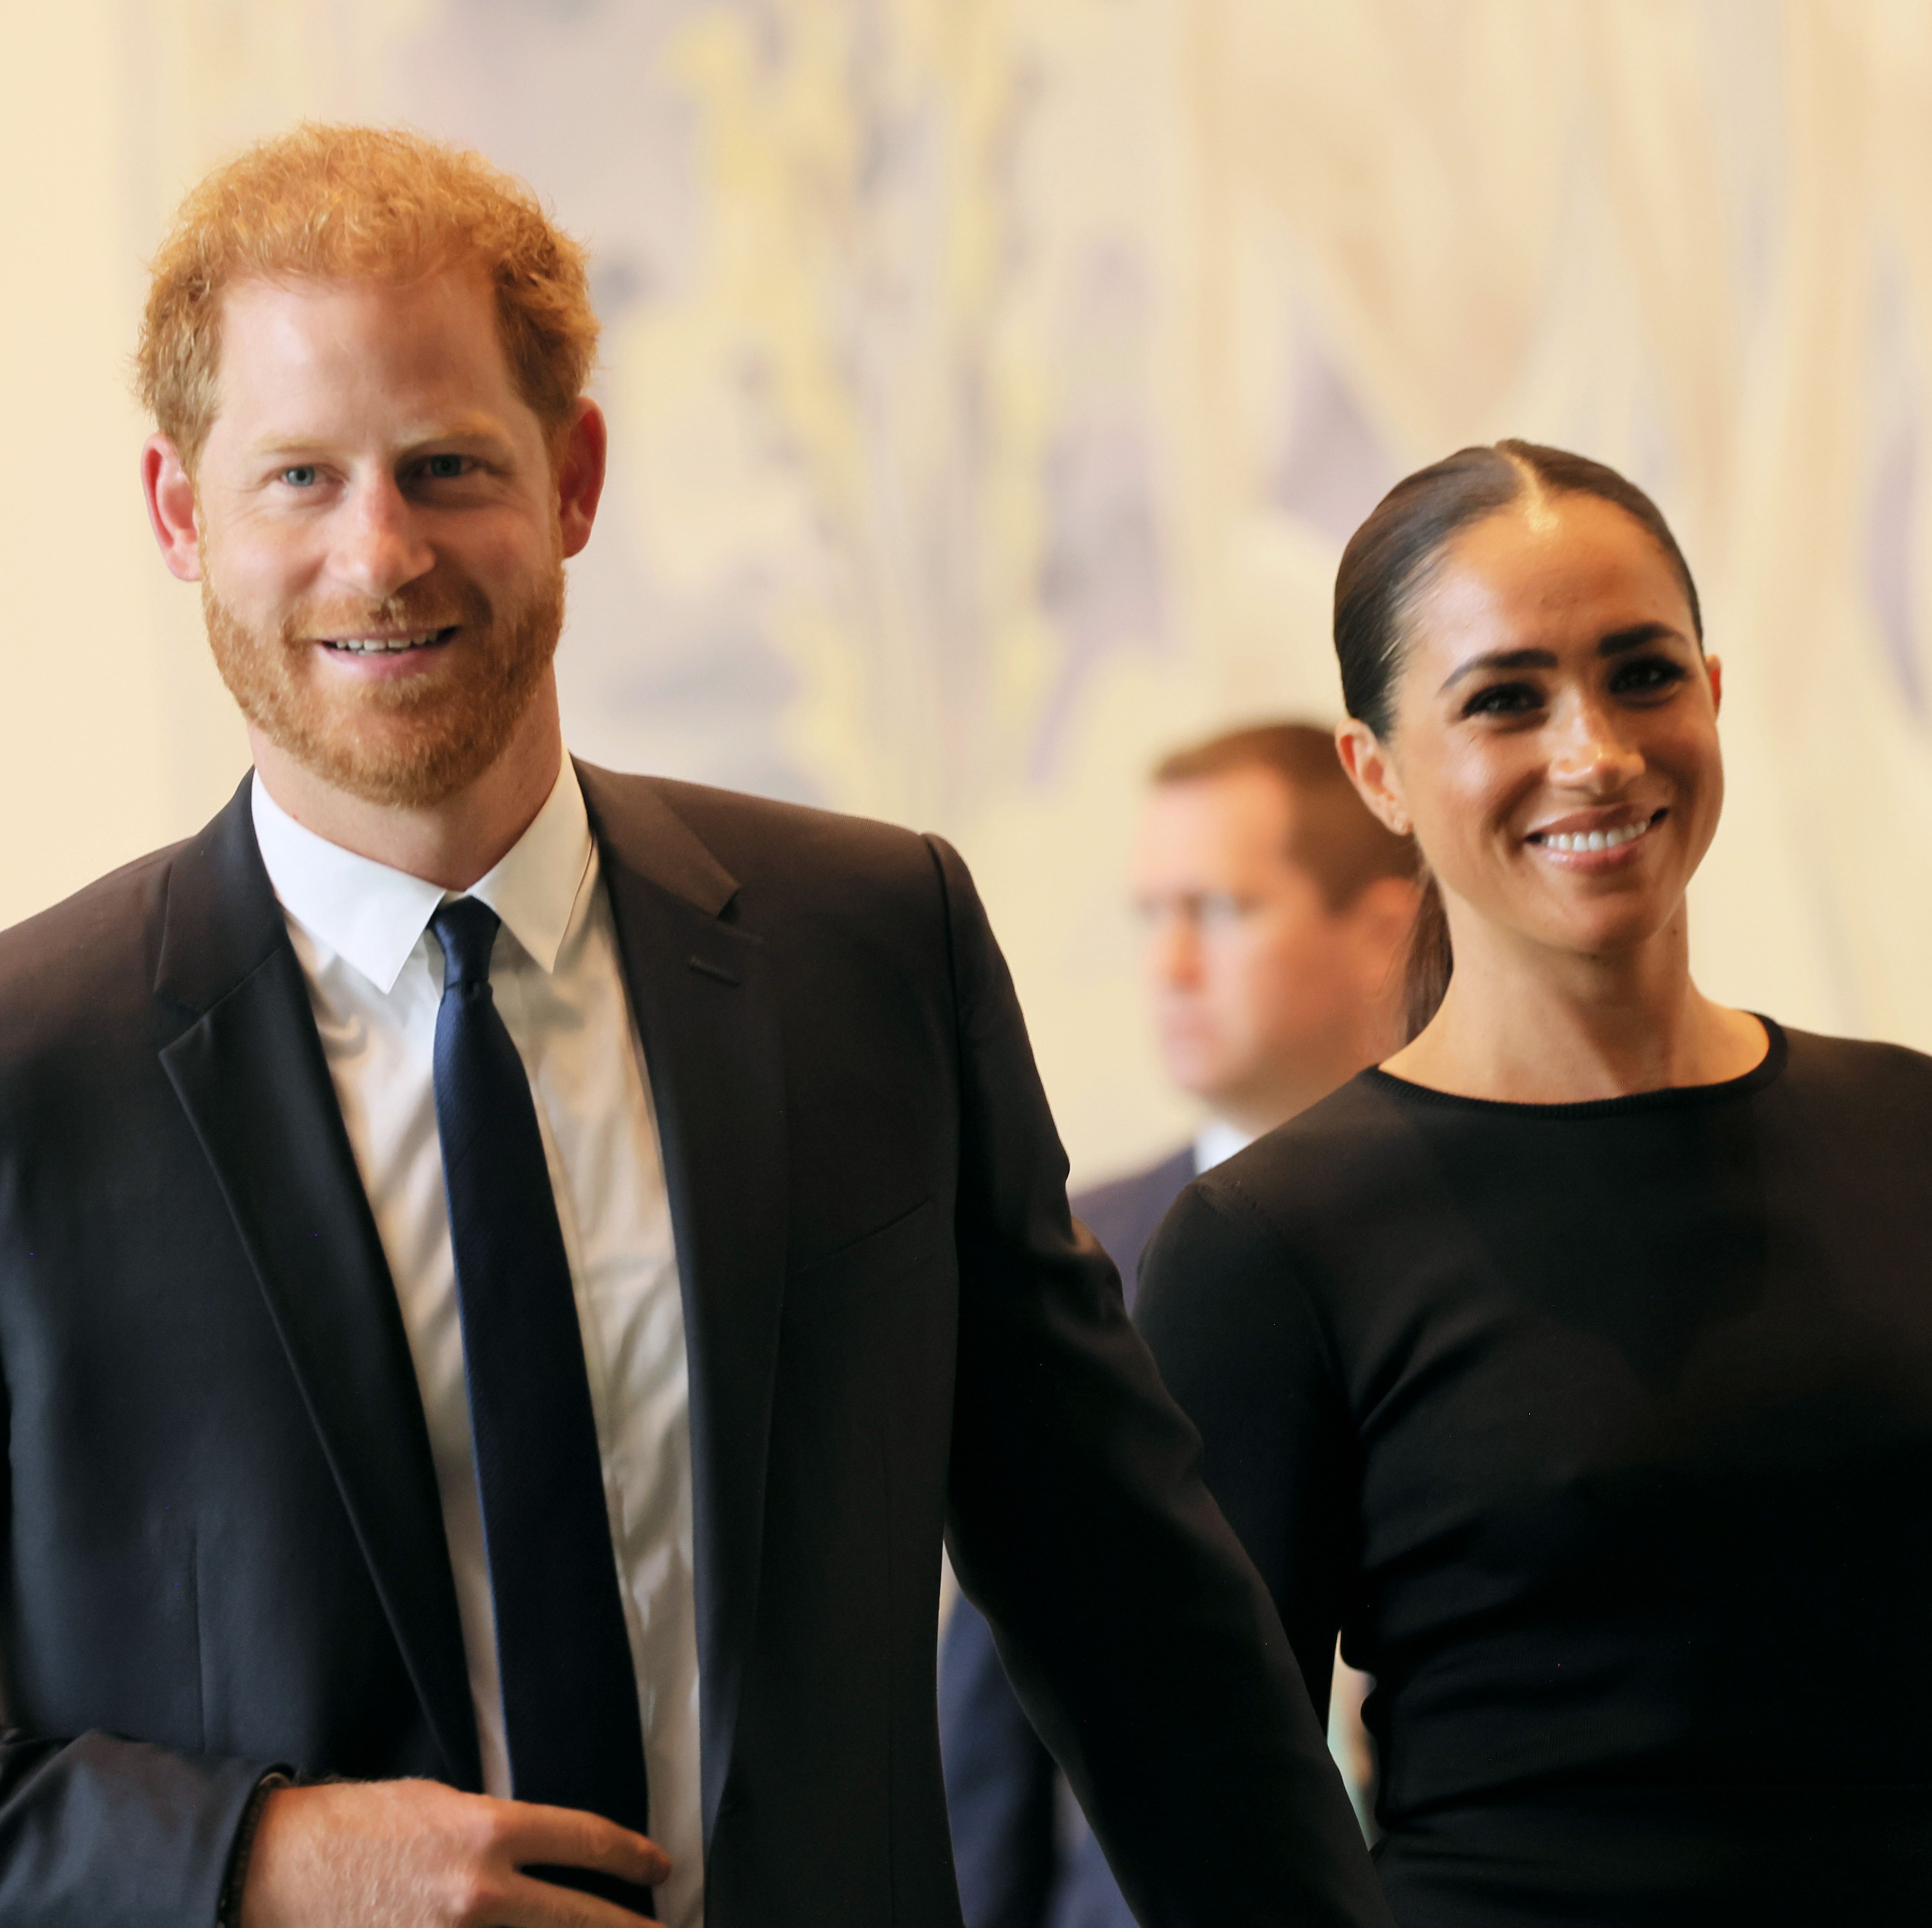 The Duke and Duchess of Sussex matched in black for their appearance at the UN for Nelson Mandela Day.